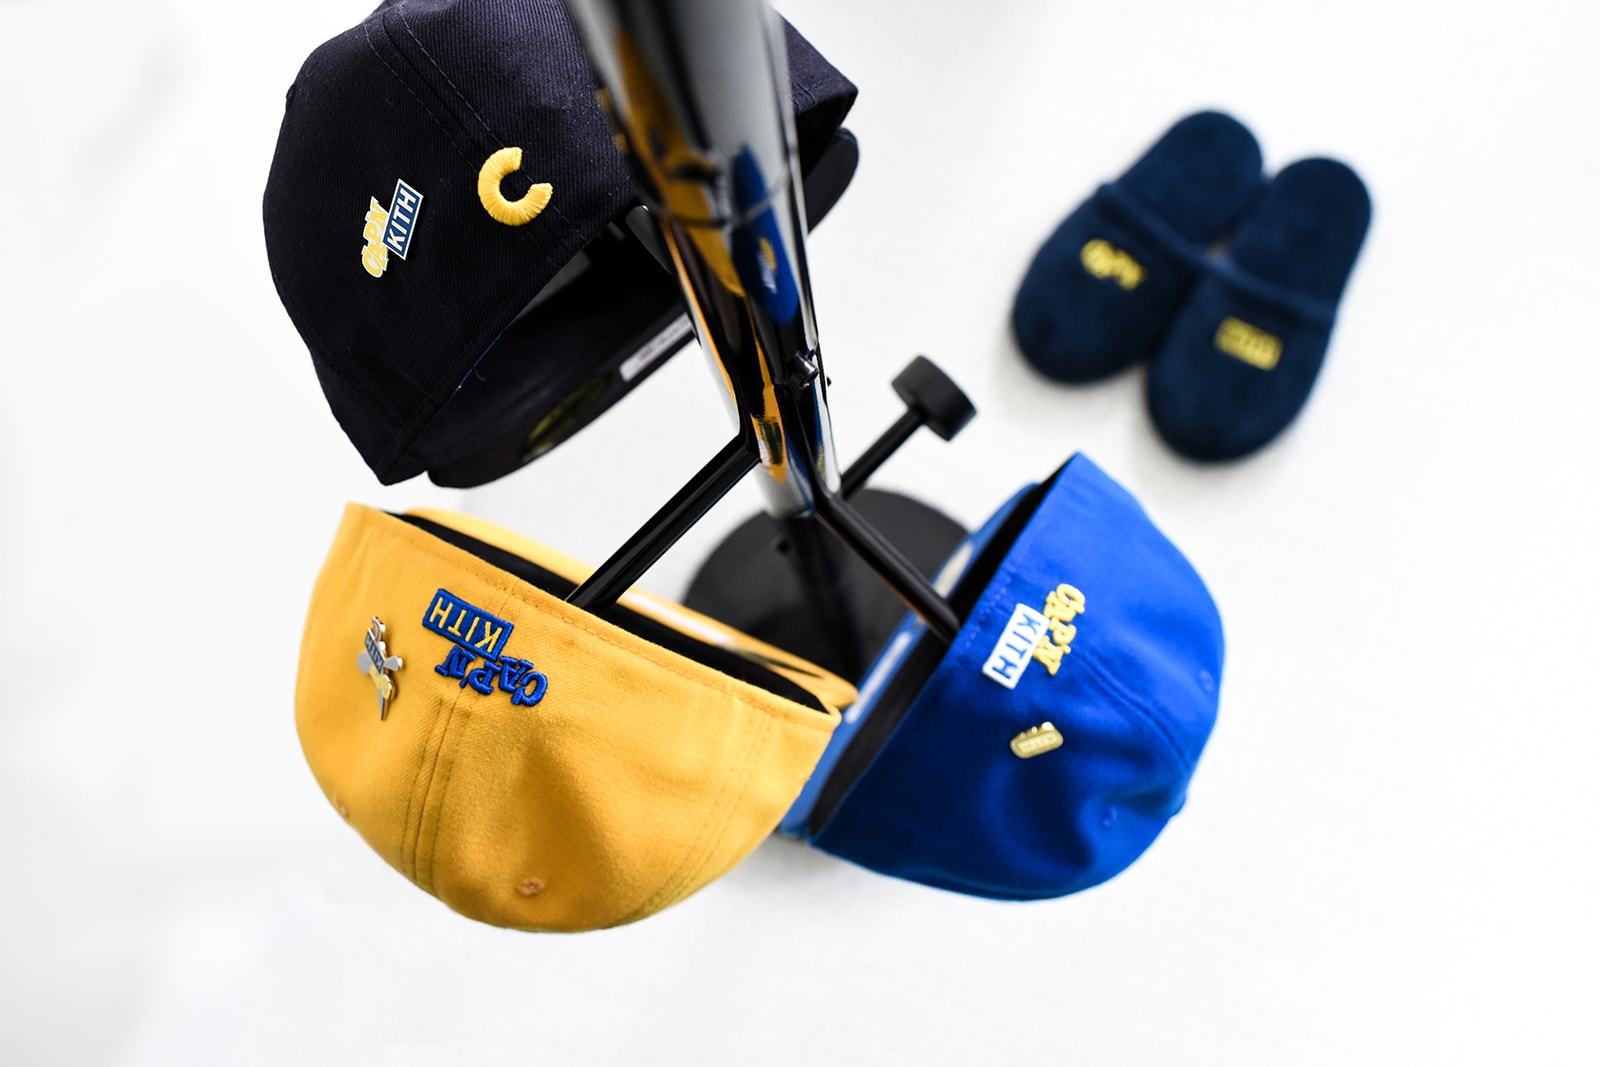 KITH x Cap'n Crunch Collection